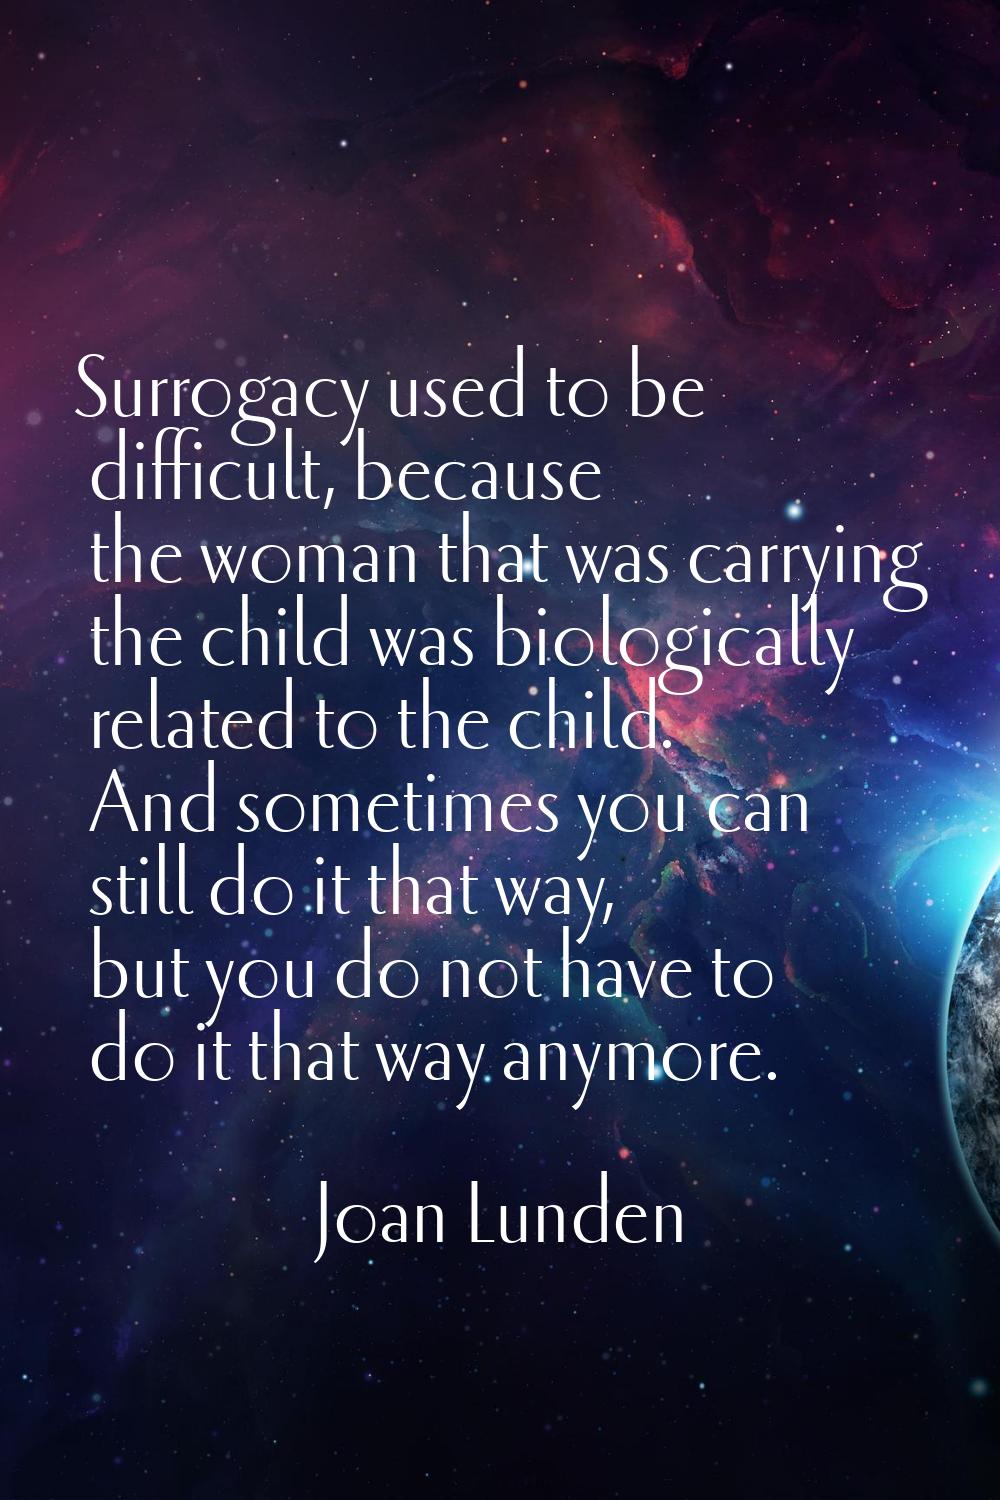 Surrogacy used to be difficult, because the woman that was carrying the child was biologically rela